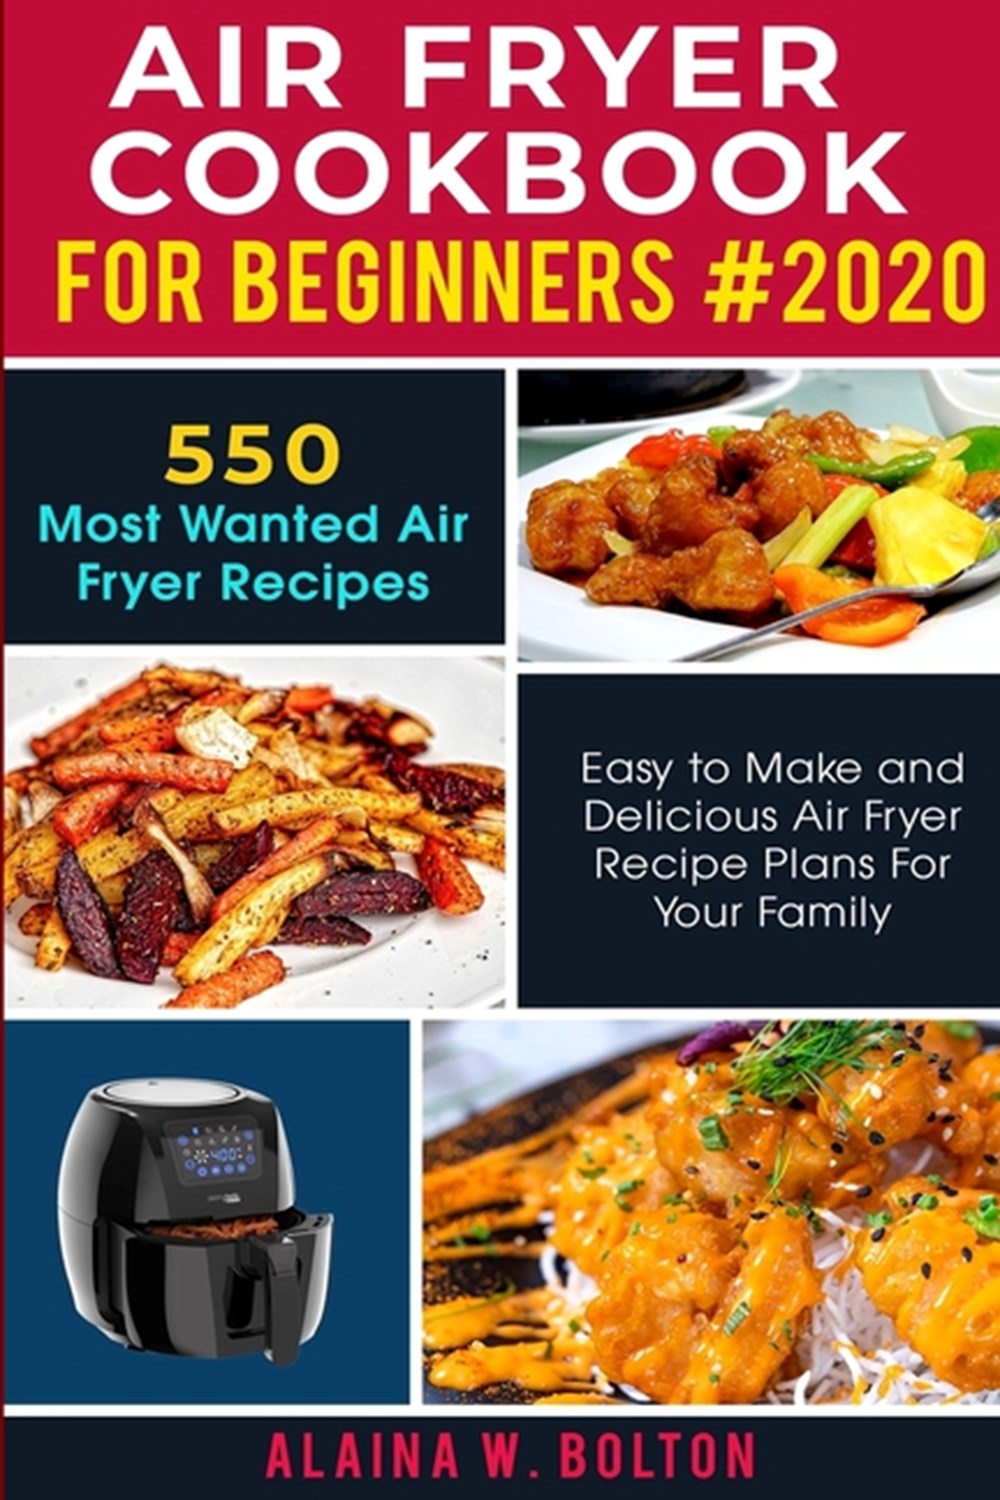 40-printable-air-fryer-recipe-book-pictures-cook-using-air-fryer